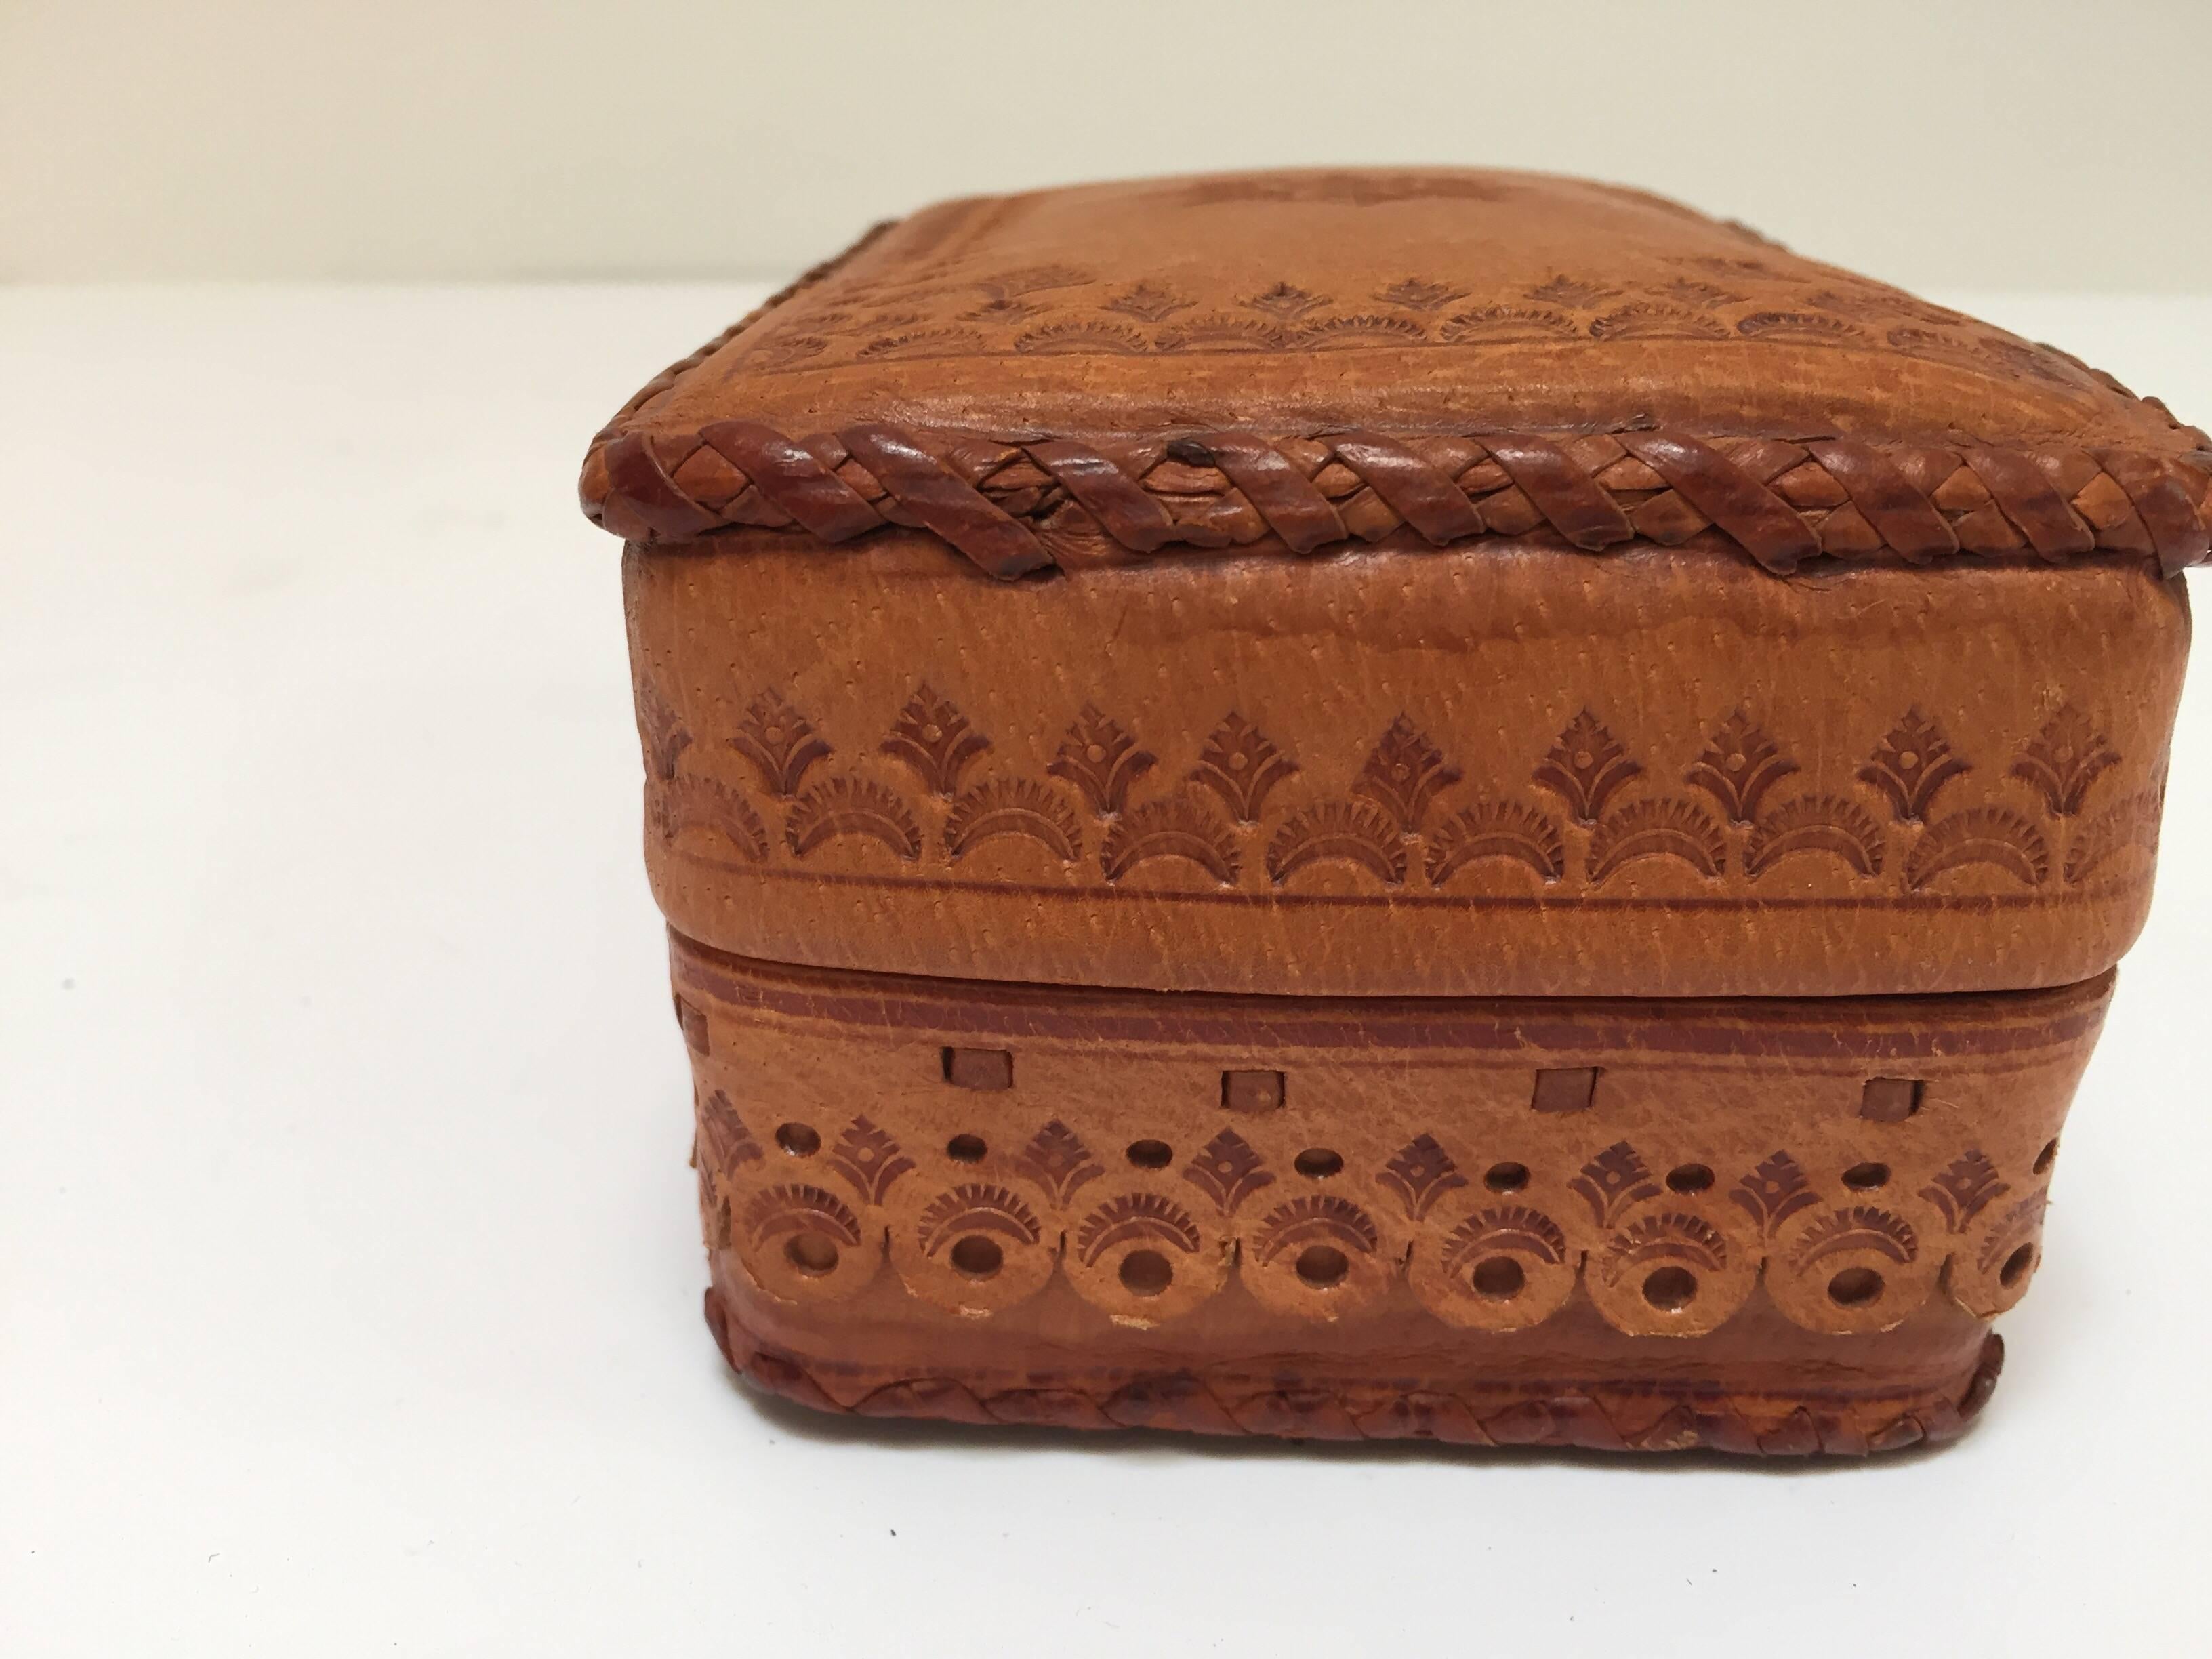 Leather Vintage Brown Box Hand Tooled in Morocco with Tribal African Designs 1